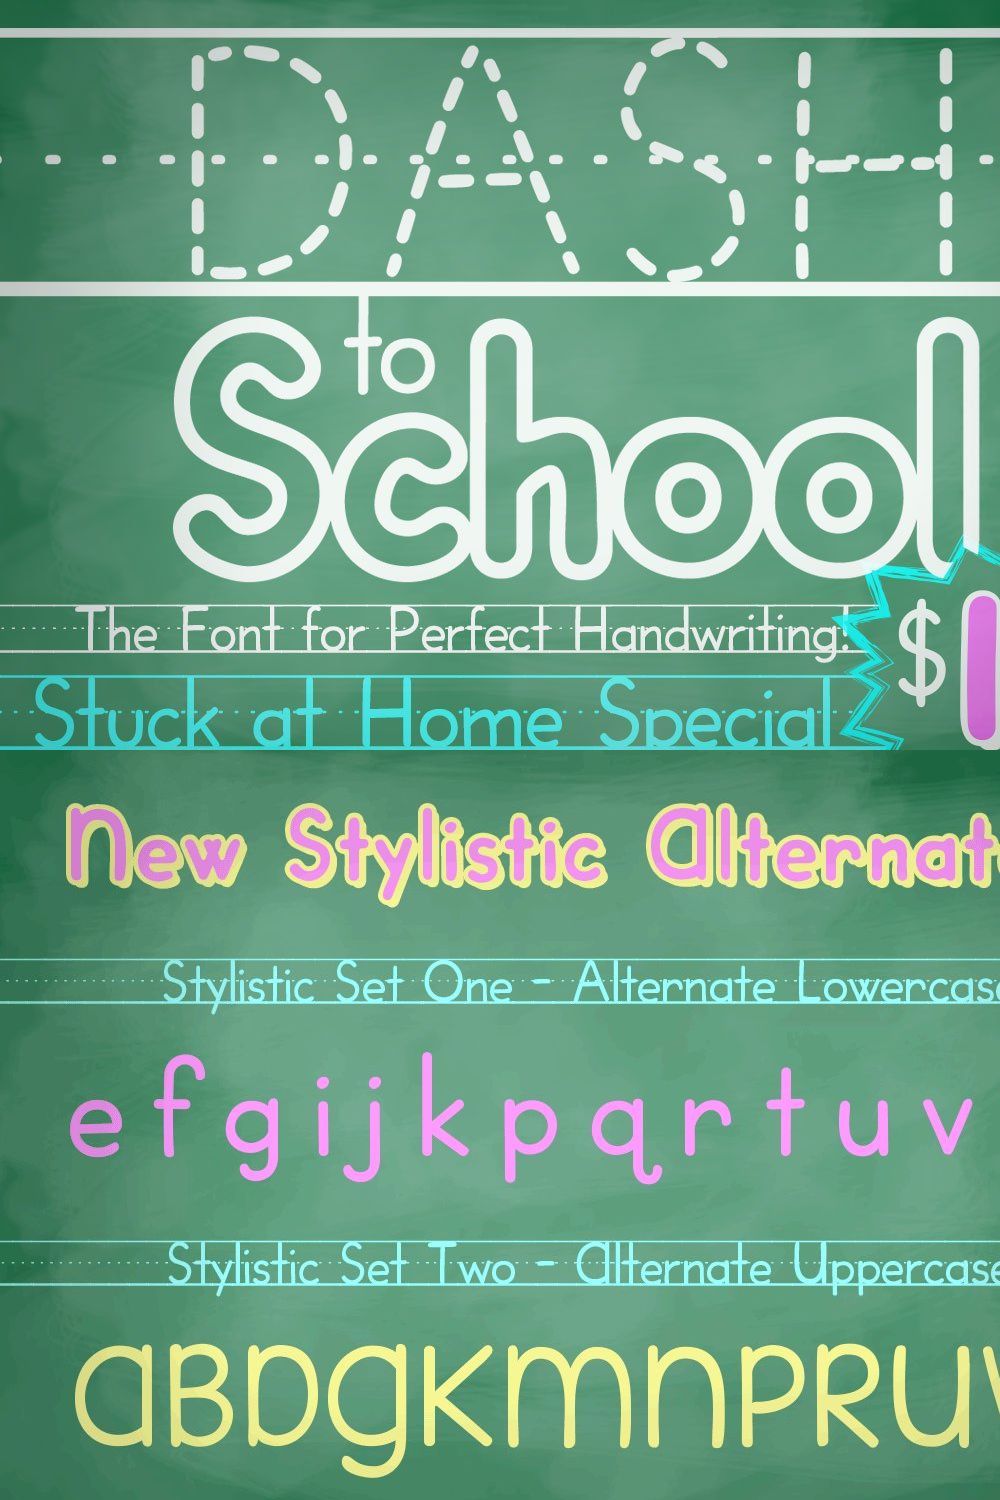 Dash to School - a handwriting font pinterest preview image.